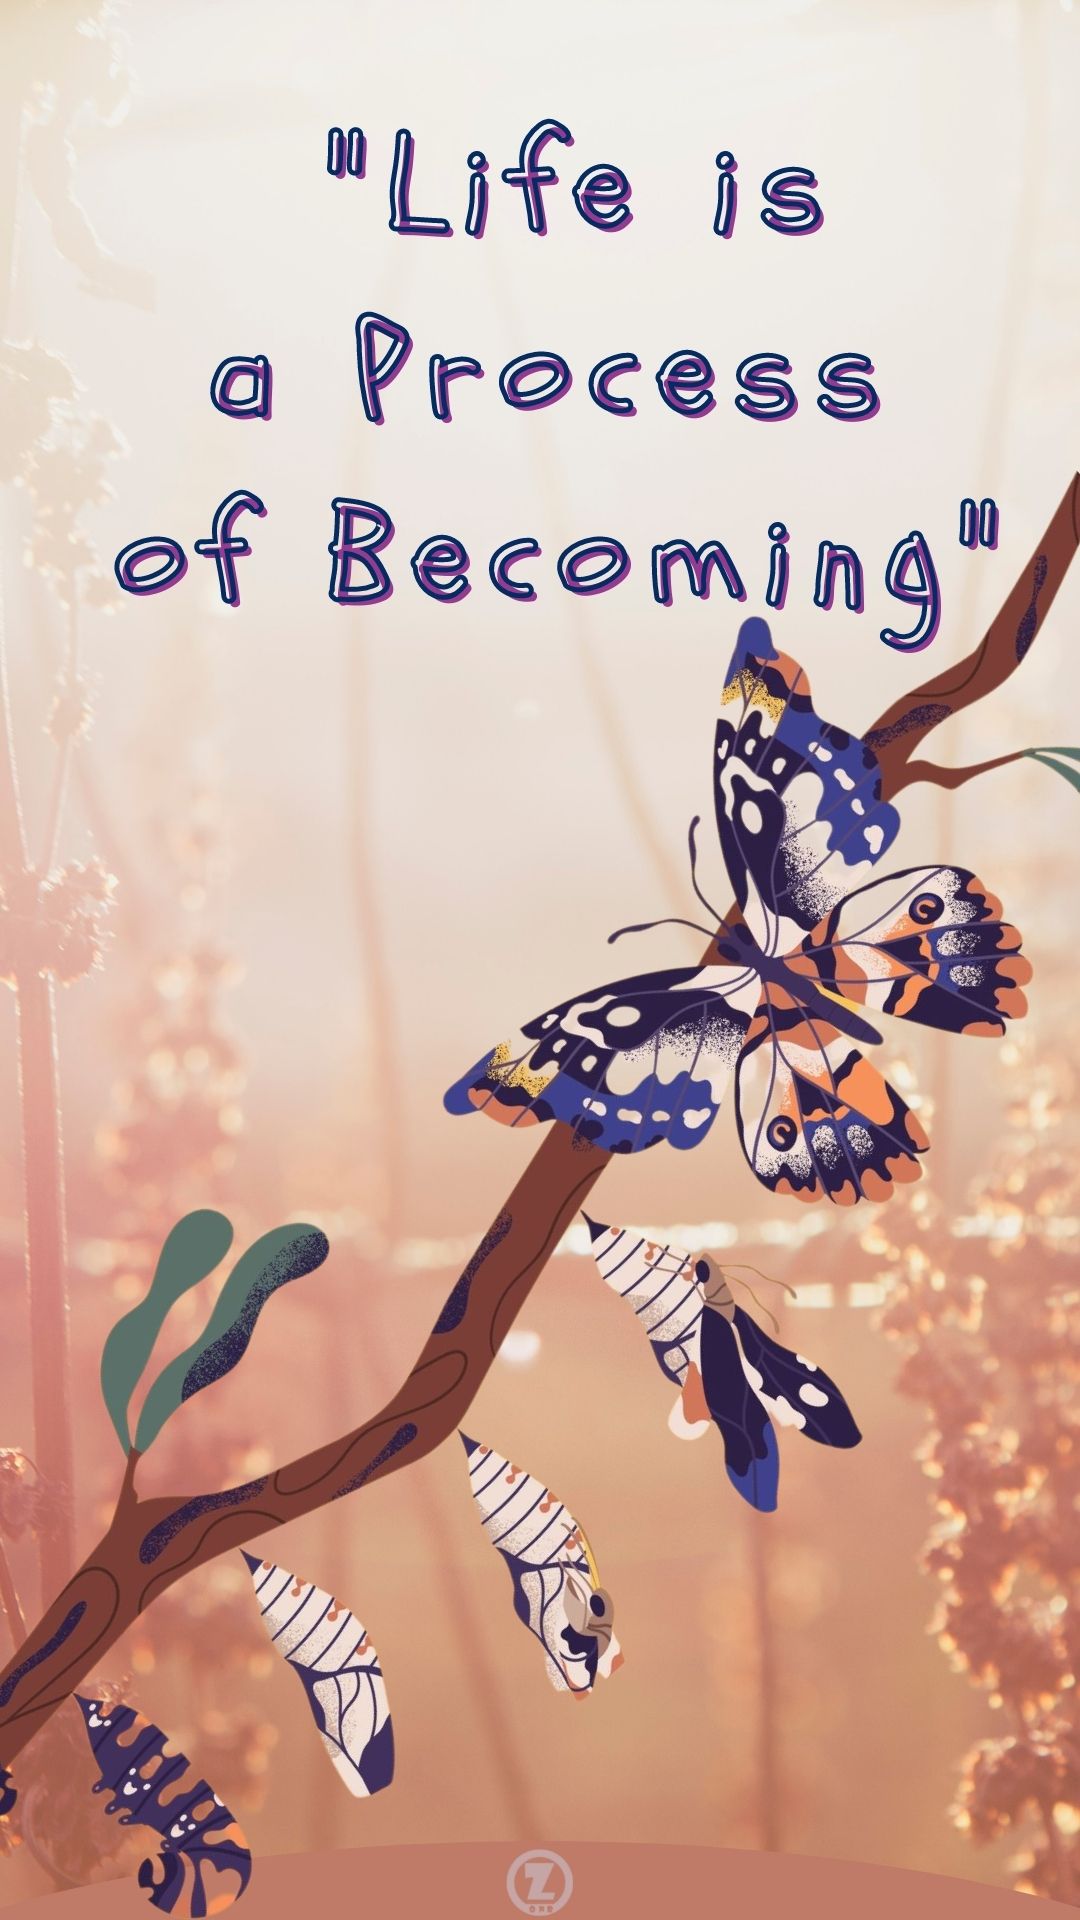 Read more about the article “Life is a Process of Becoming” – Step 2